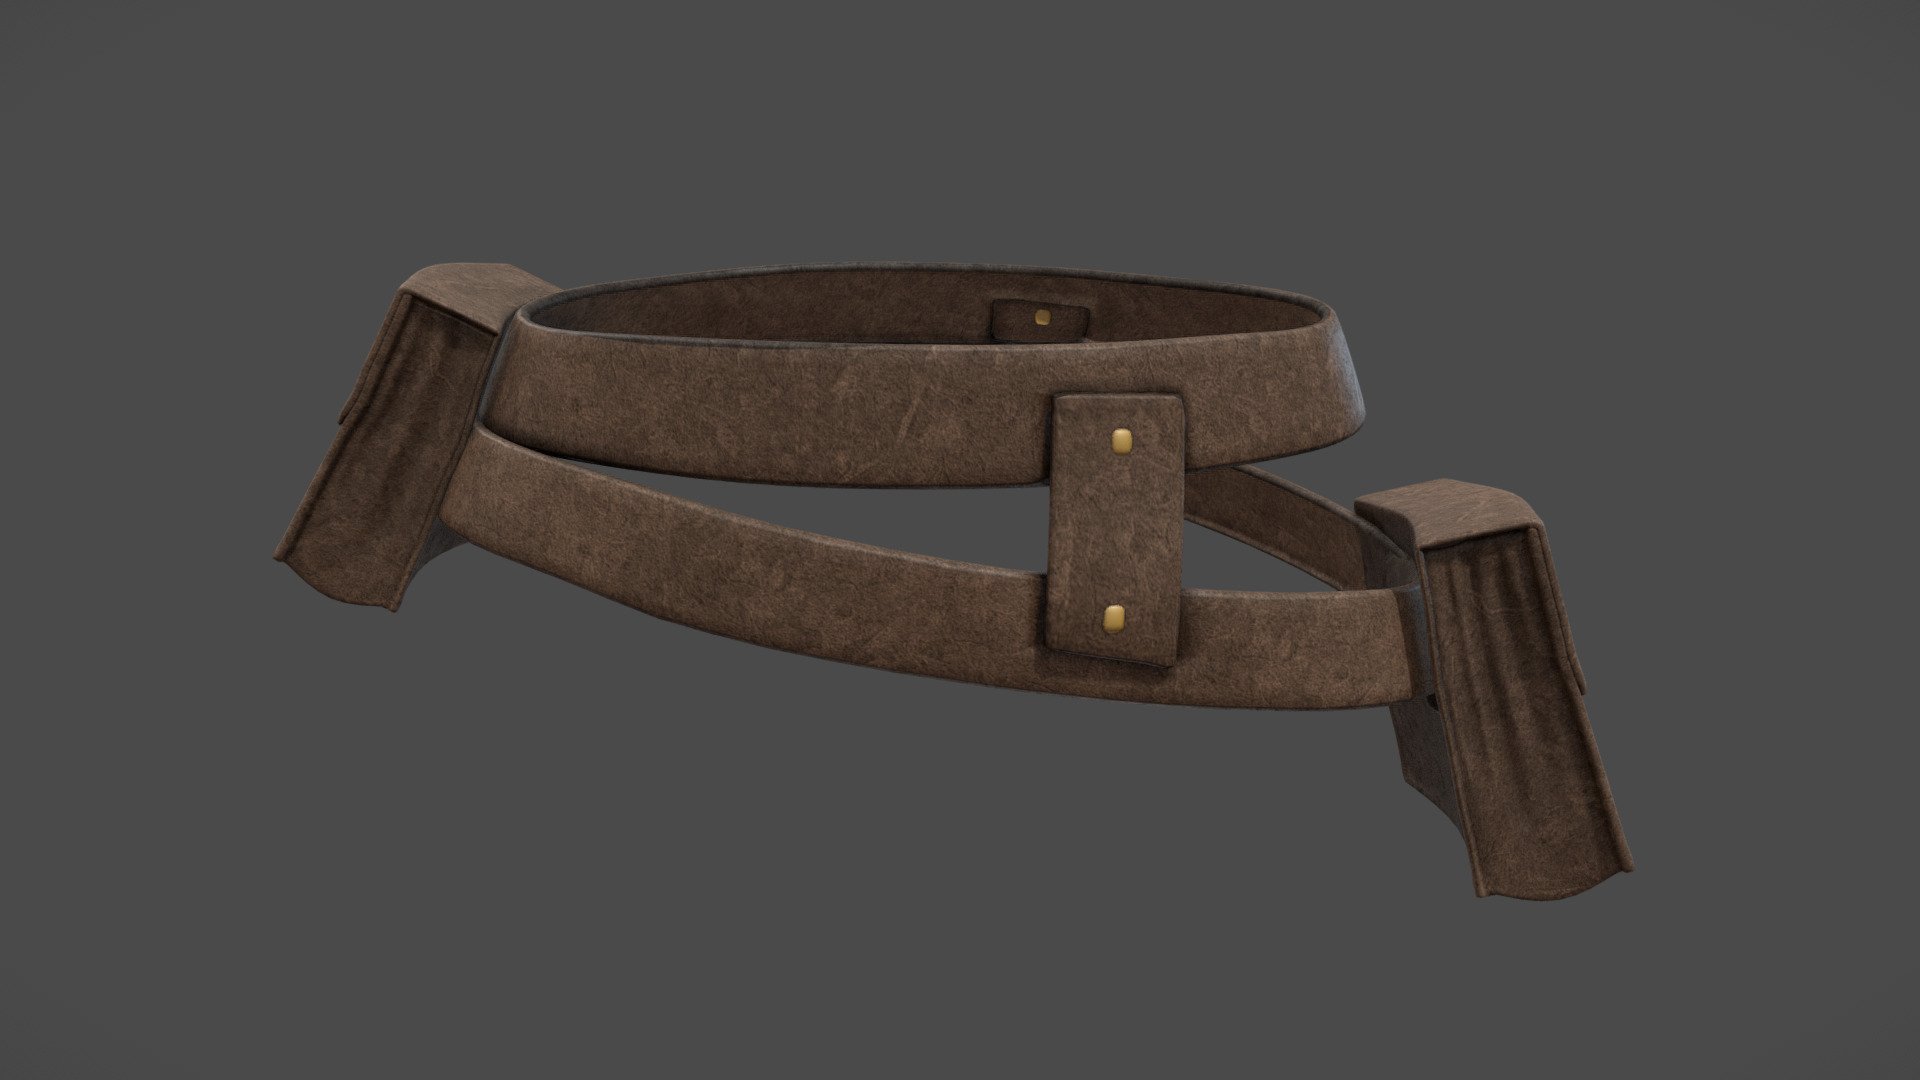 Steampunk Utility Belt

Can be fitted to any character

Clean topology

No overlapping smart optimized unwrapped UVs

High-quality realistic textures

FBX, OBJ, gITF, USDZ (request other formats)

PBR or Classic

Type     user:3dia &ldquo;search term